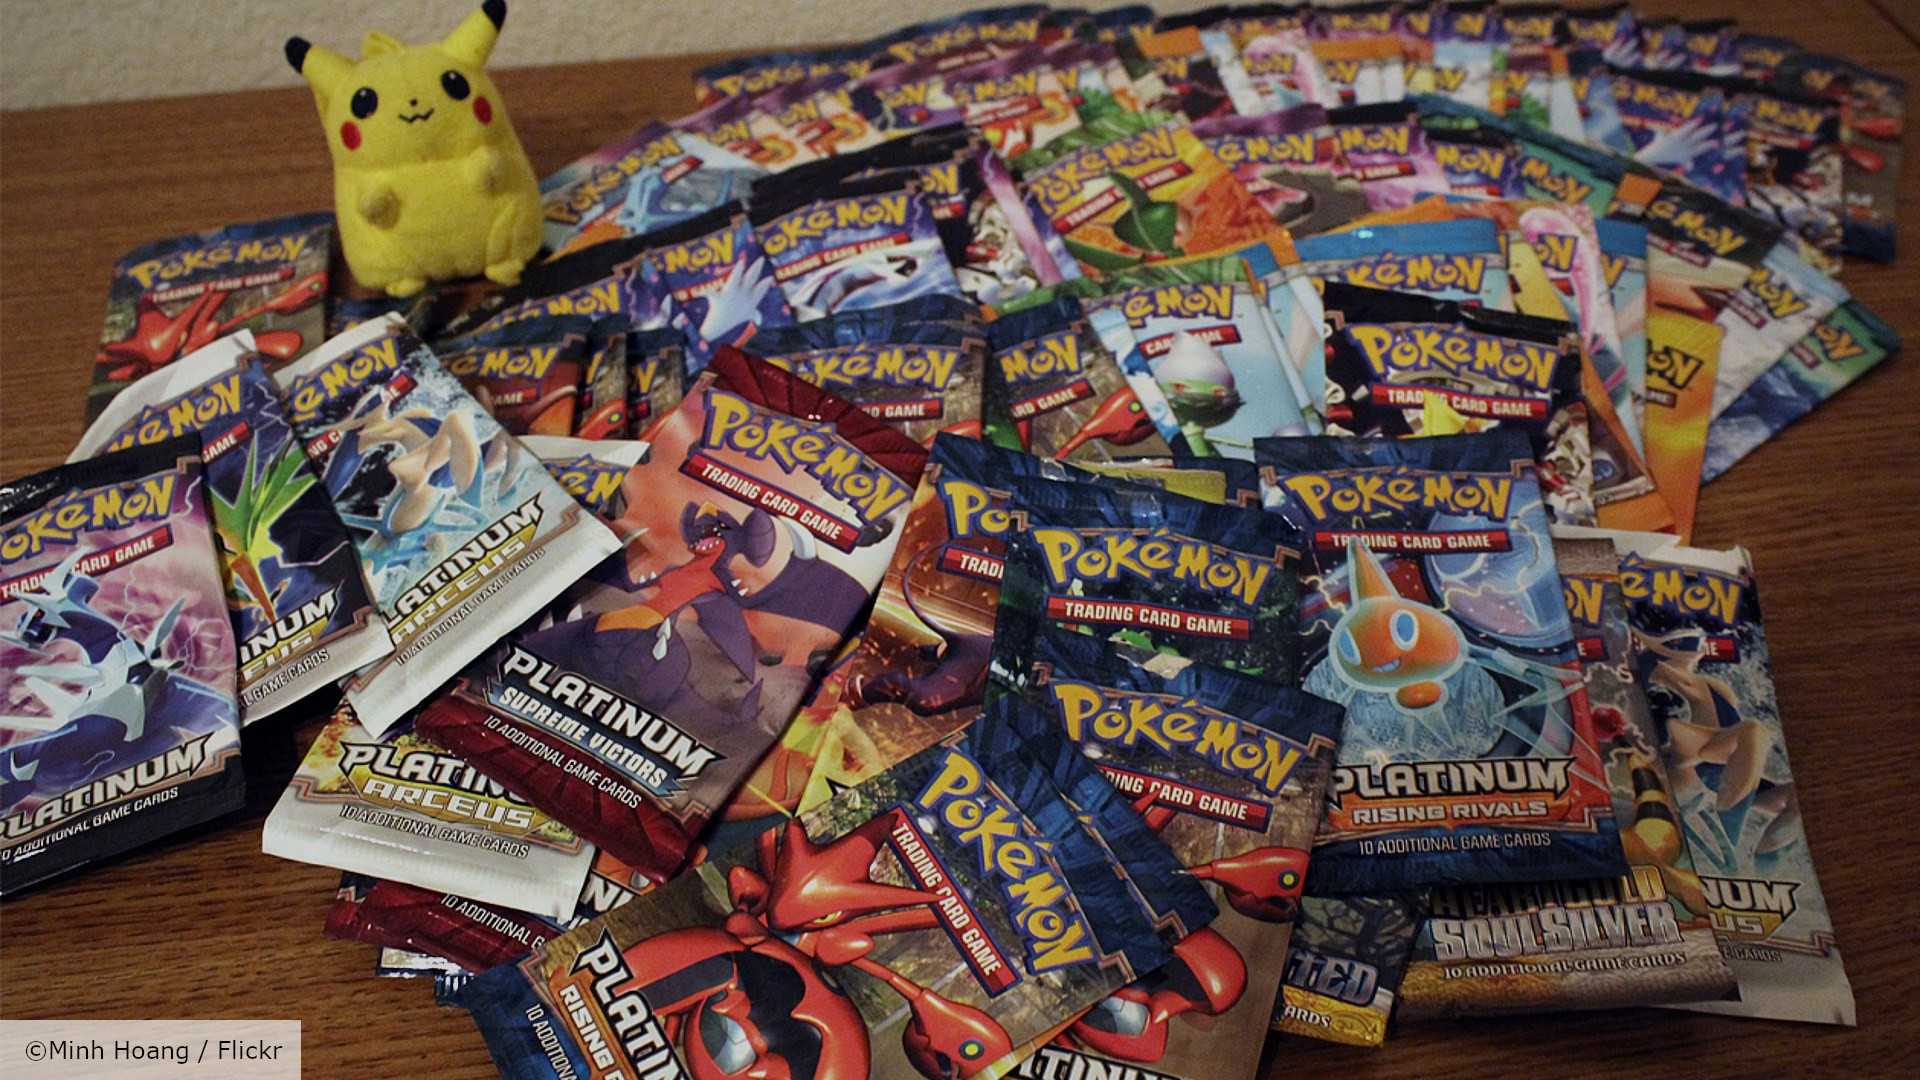 1st Edition Set Of Pokemon Cards, Including A Charizard, Sells For $666,000